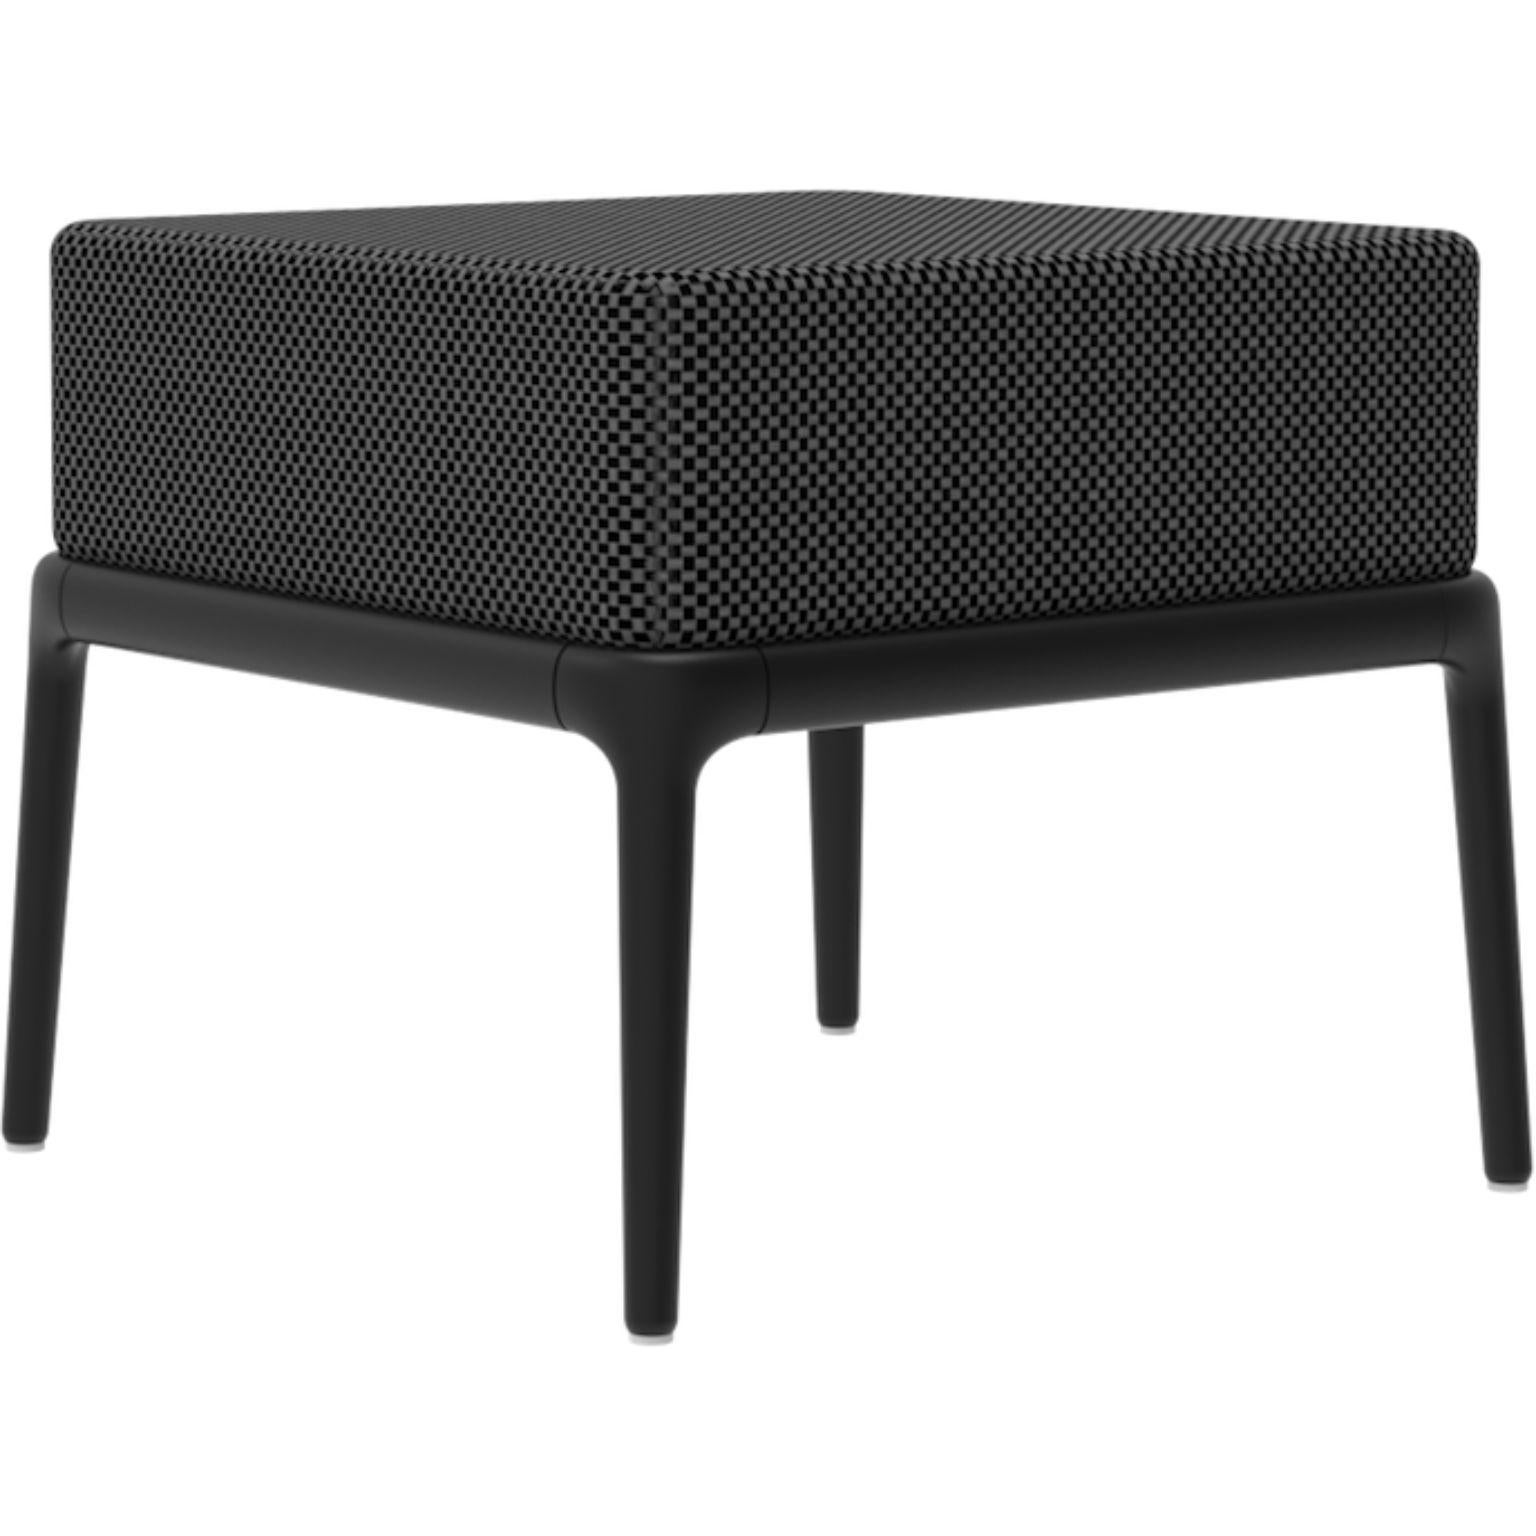 Xaloc black pouf 50 by Mowee.
Dimensions: D50 x W50 x H43 cm
Material: Aluminium, Textile
Weight: 7 kg
Also Available in different colours and finishes.

 Xaloc synthesizes the lines of interior furniture to extrapolate to the exterior,